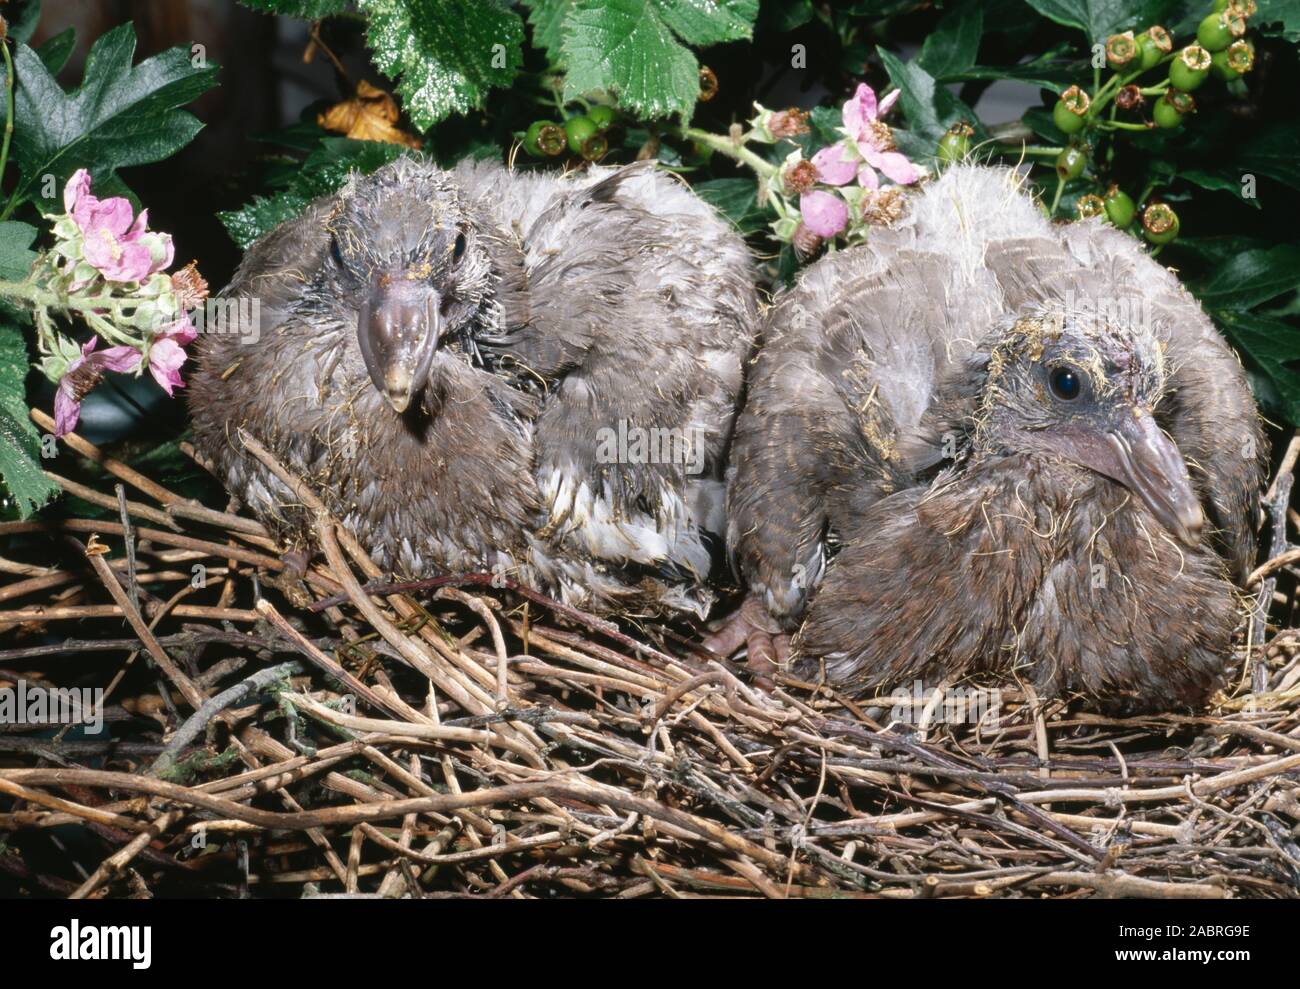 WOOD PIGEON young on nest (Columba palumbus). Clutch of two eggs, now two well developed squabs or juveniles.  UK. Stock Photo